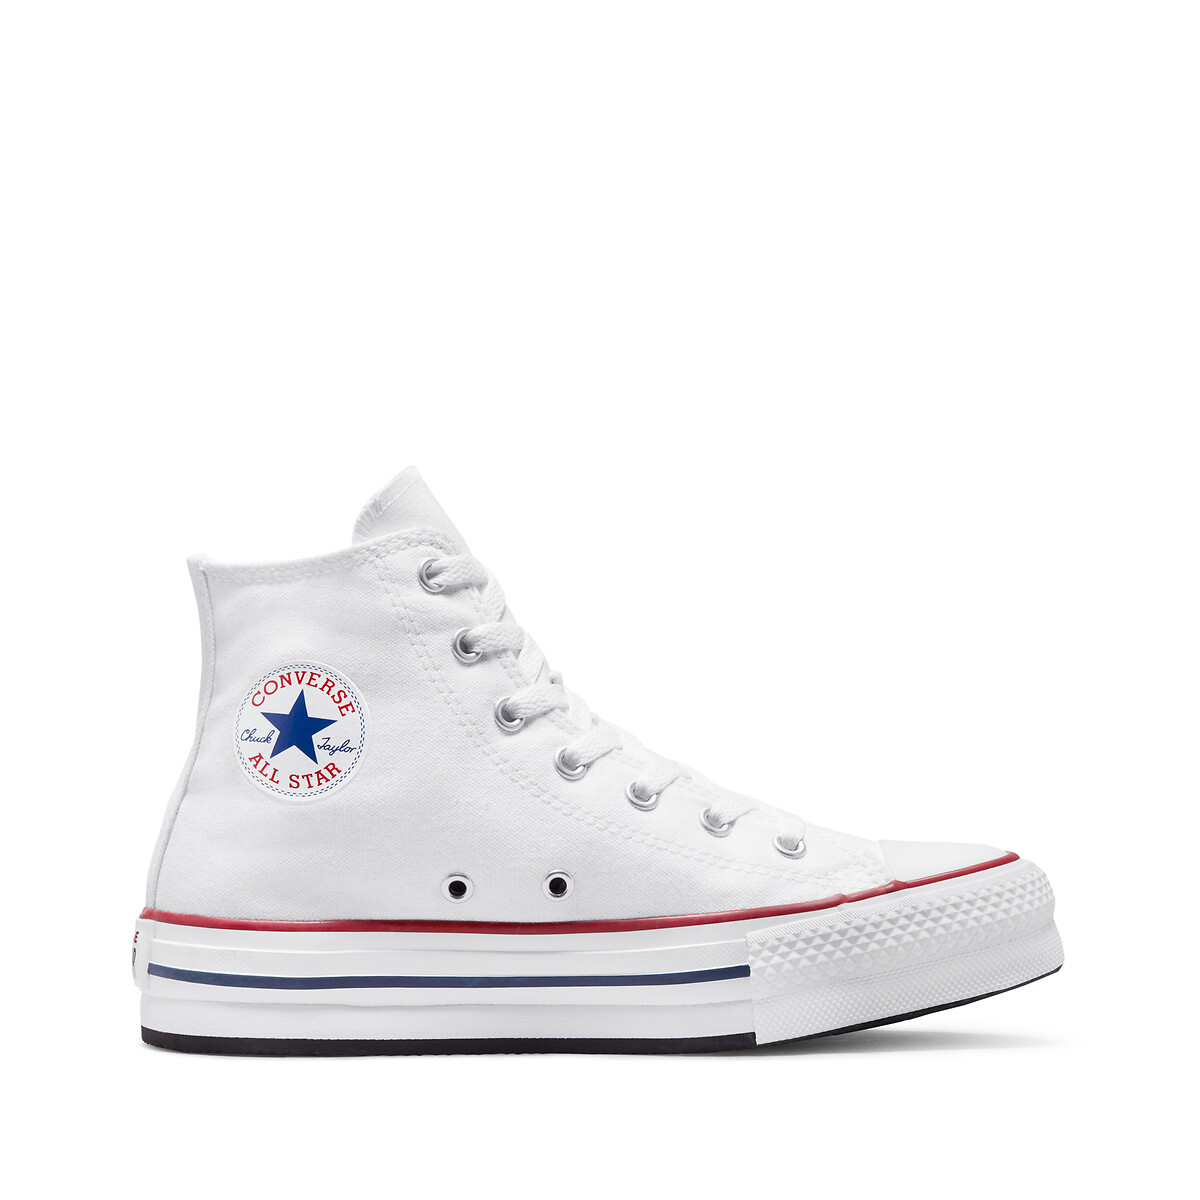 eva taylor weiss chuck all star Sneakers | Redoute La lift Converse